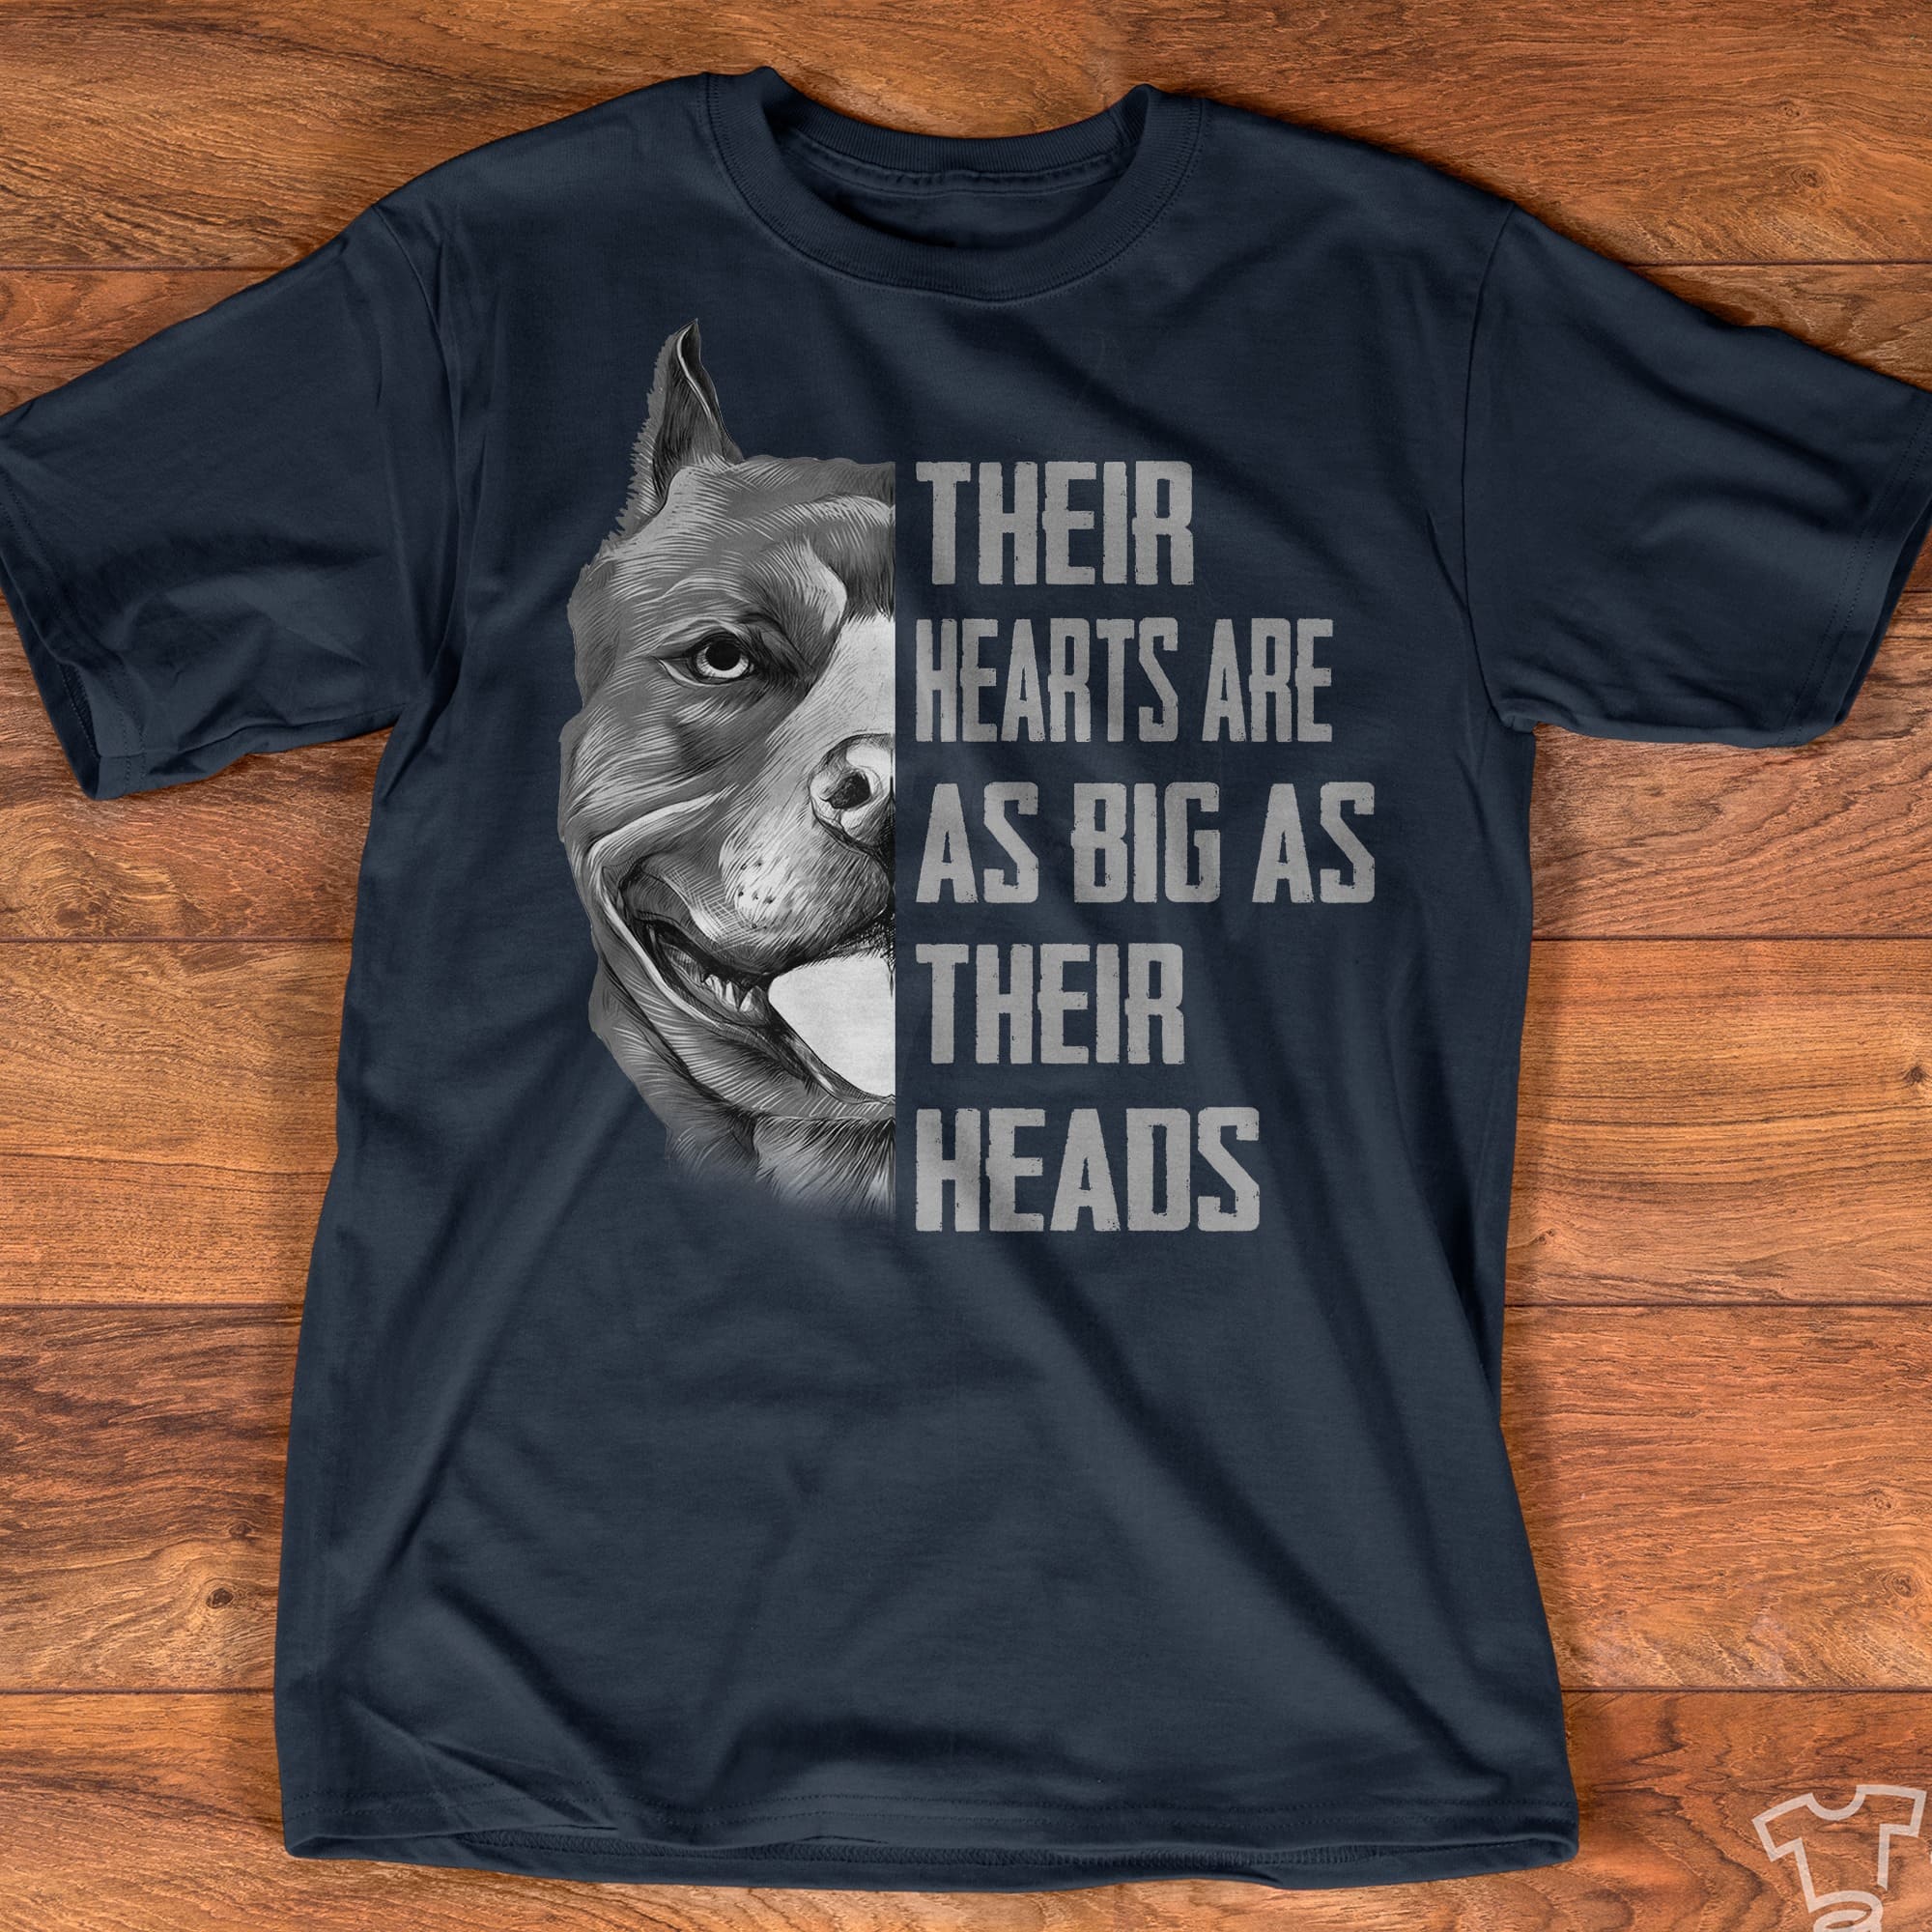 Theirs hearts are as big as their heads - Pitbull big heart, Pitbull graphic T-shirt